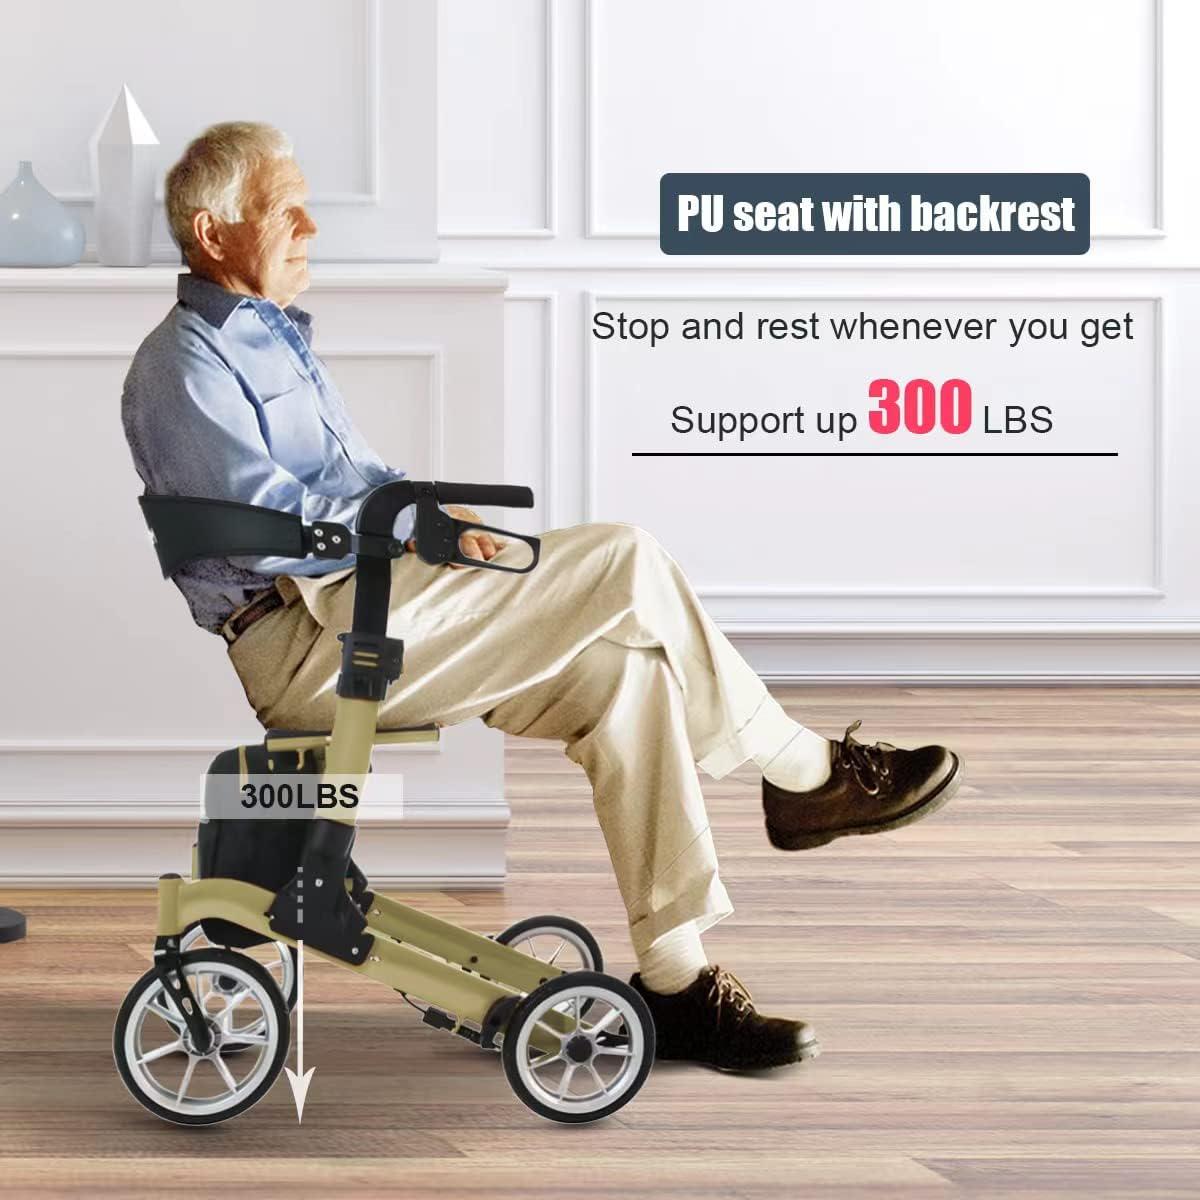 10 Front Wheels Rollator Walkers for Seniors Adjustable Height, Rollator Walker with Seat and Brakes Fold Up Heavy Duty Mobility Walking Aid for Adult Elderly, Gold, L